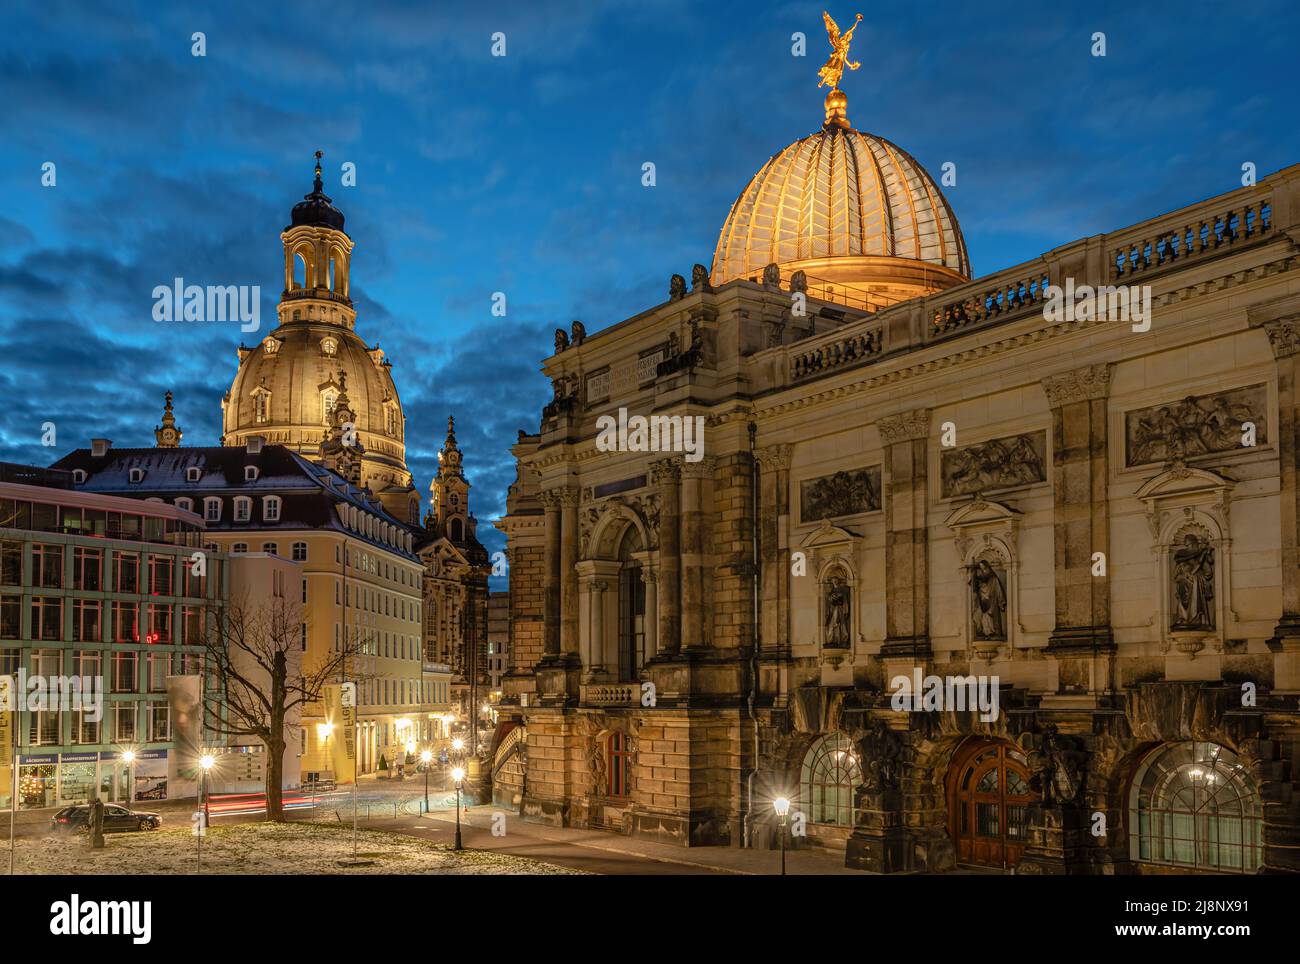 Illuminated art gallery in the Lipsius Building on Georg-Treu-Platz with the Frauenkirche Dresden at night, Saxony, Germany Stock Photo